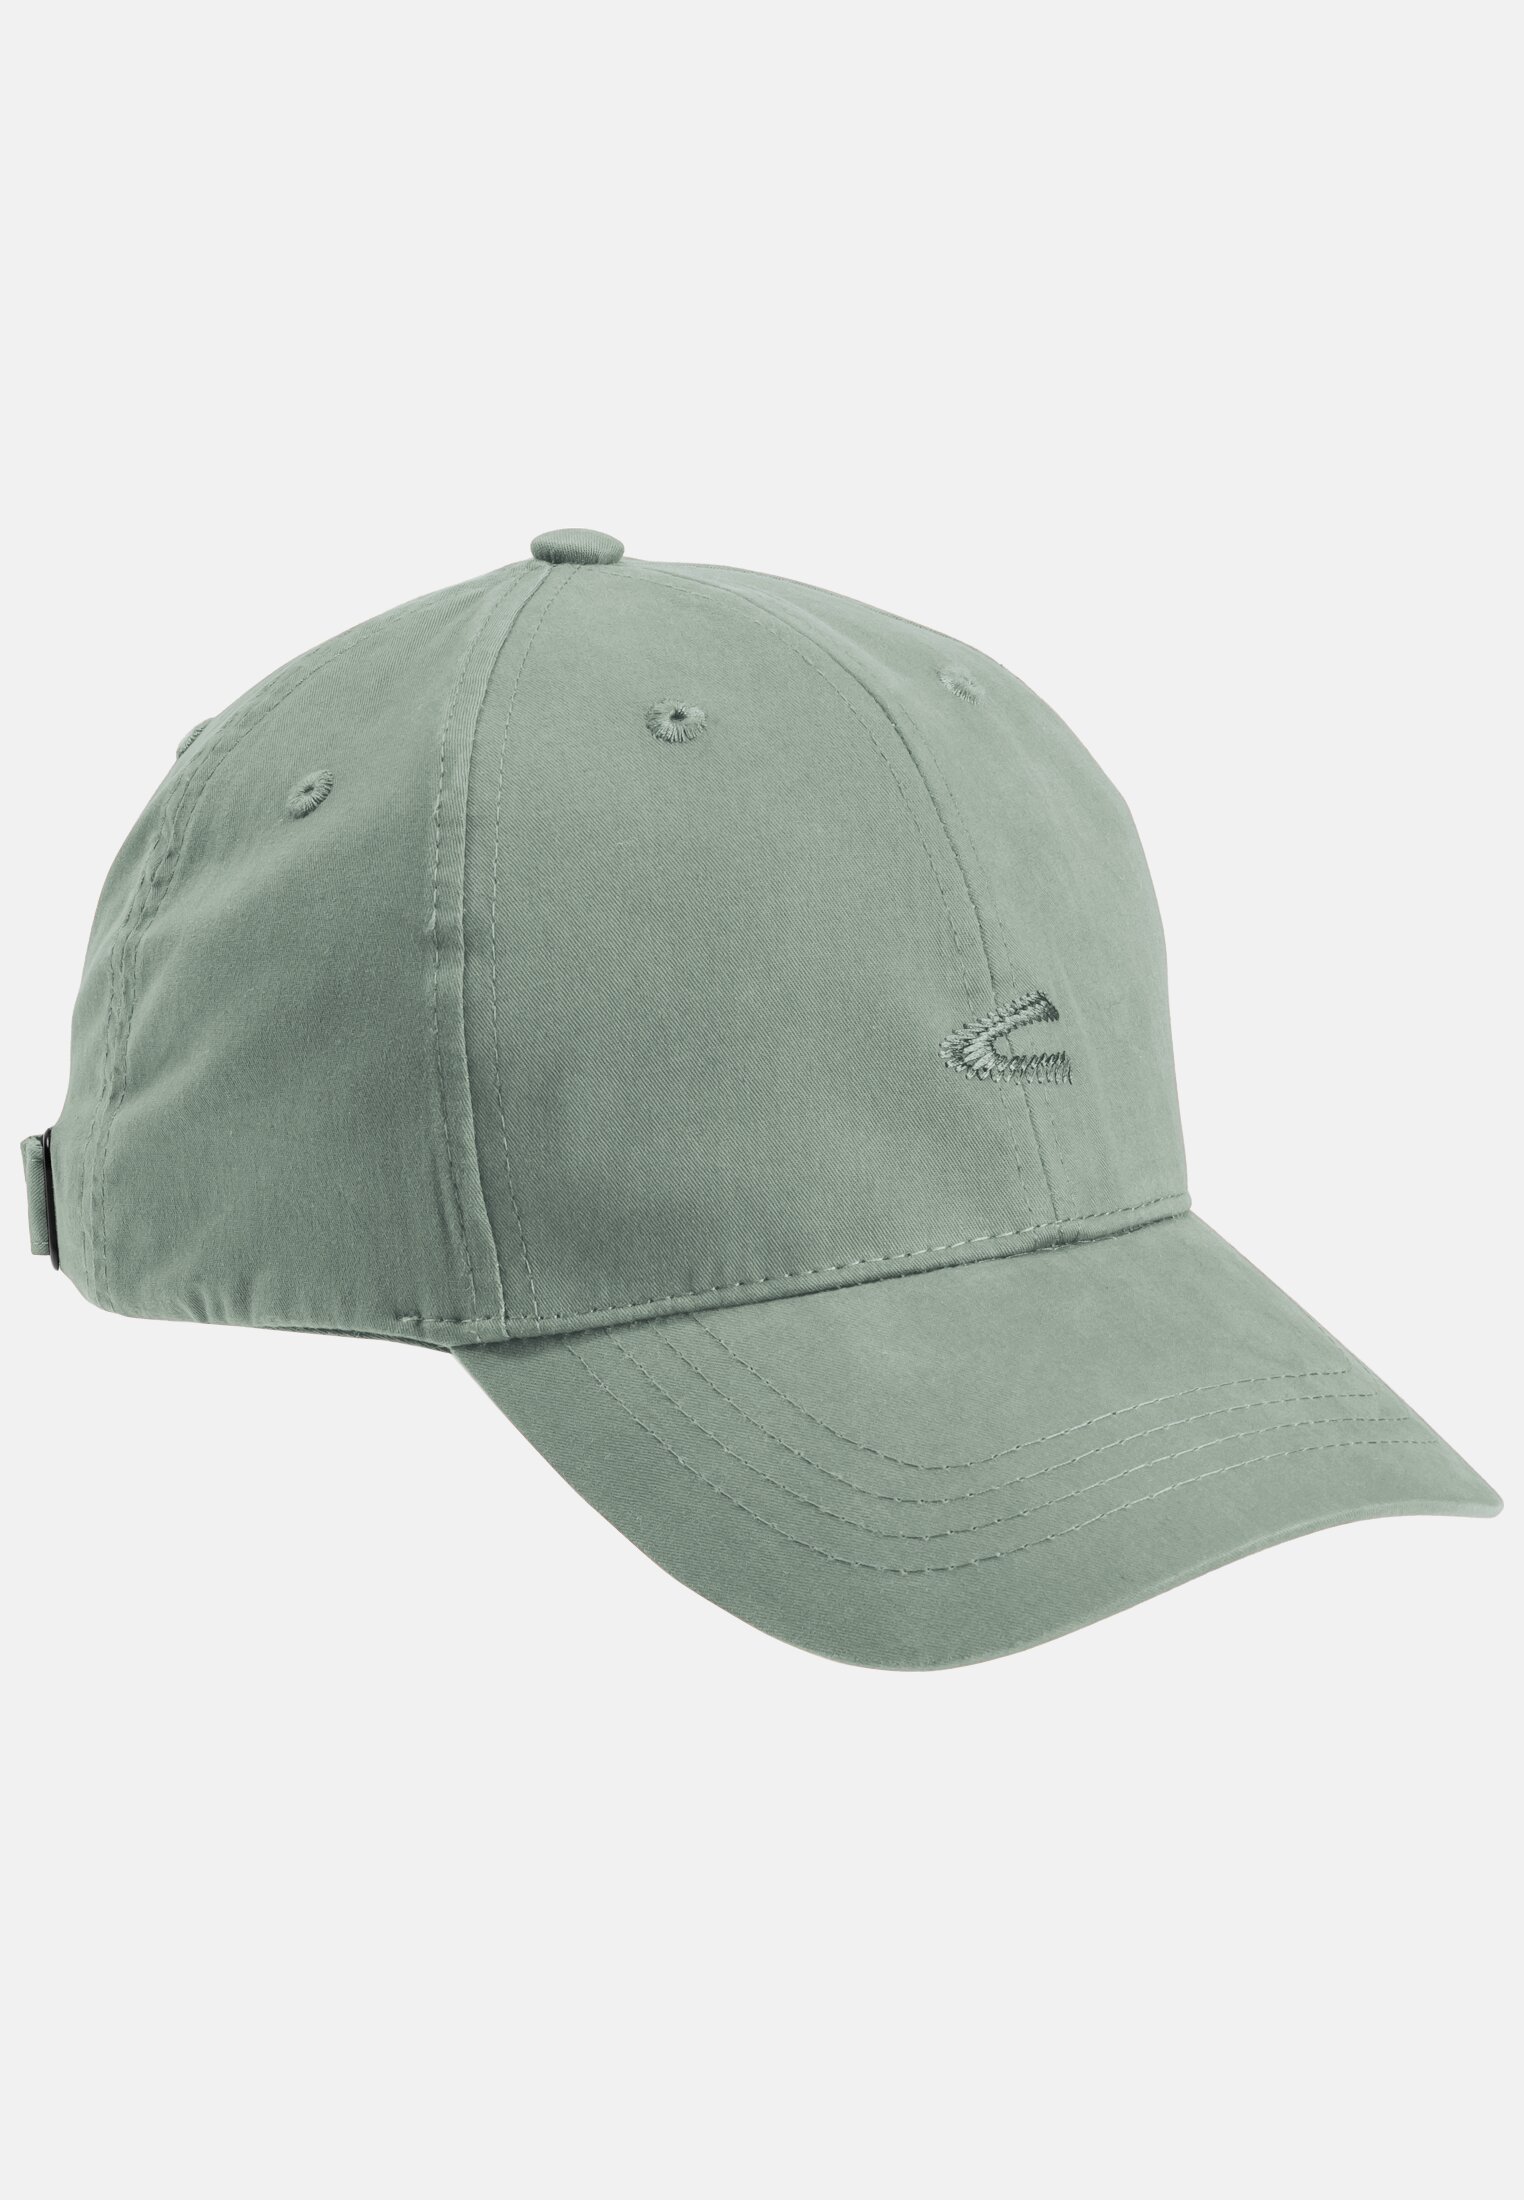 Camel Active Basic cap made of recycled cotton